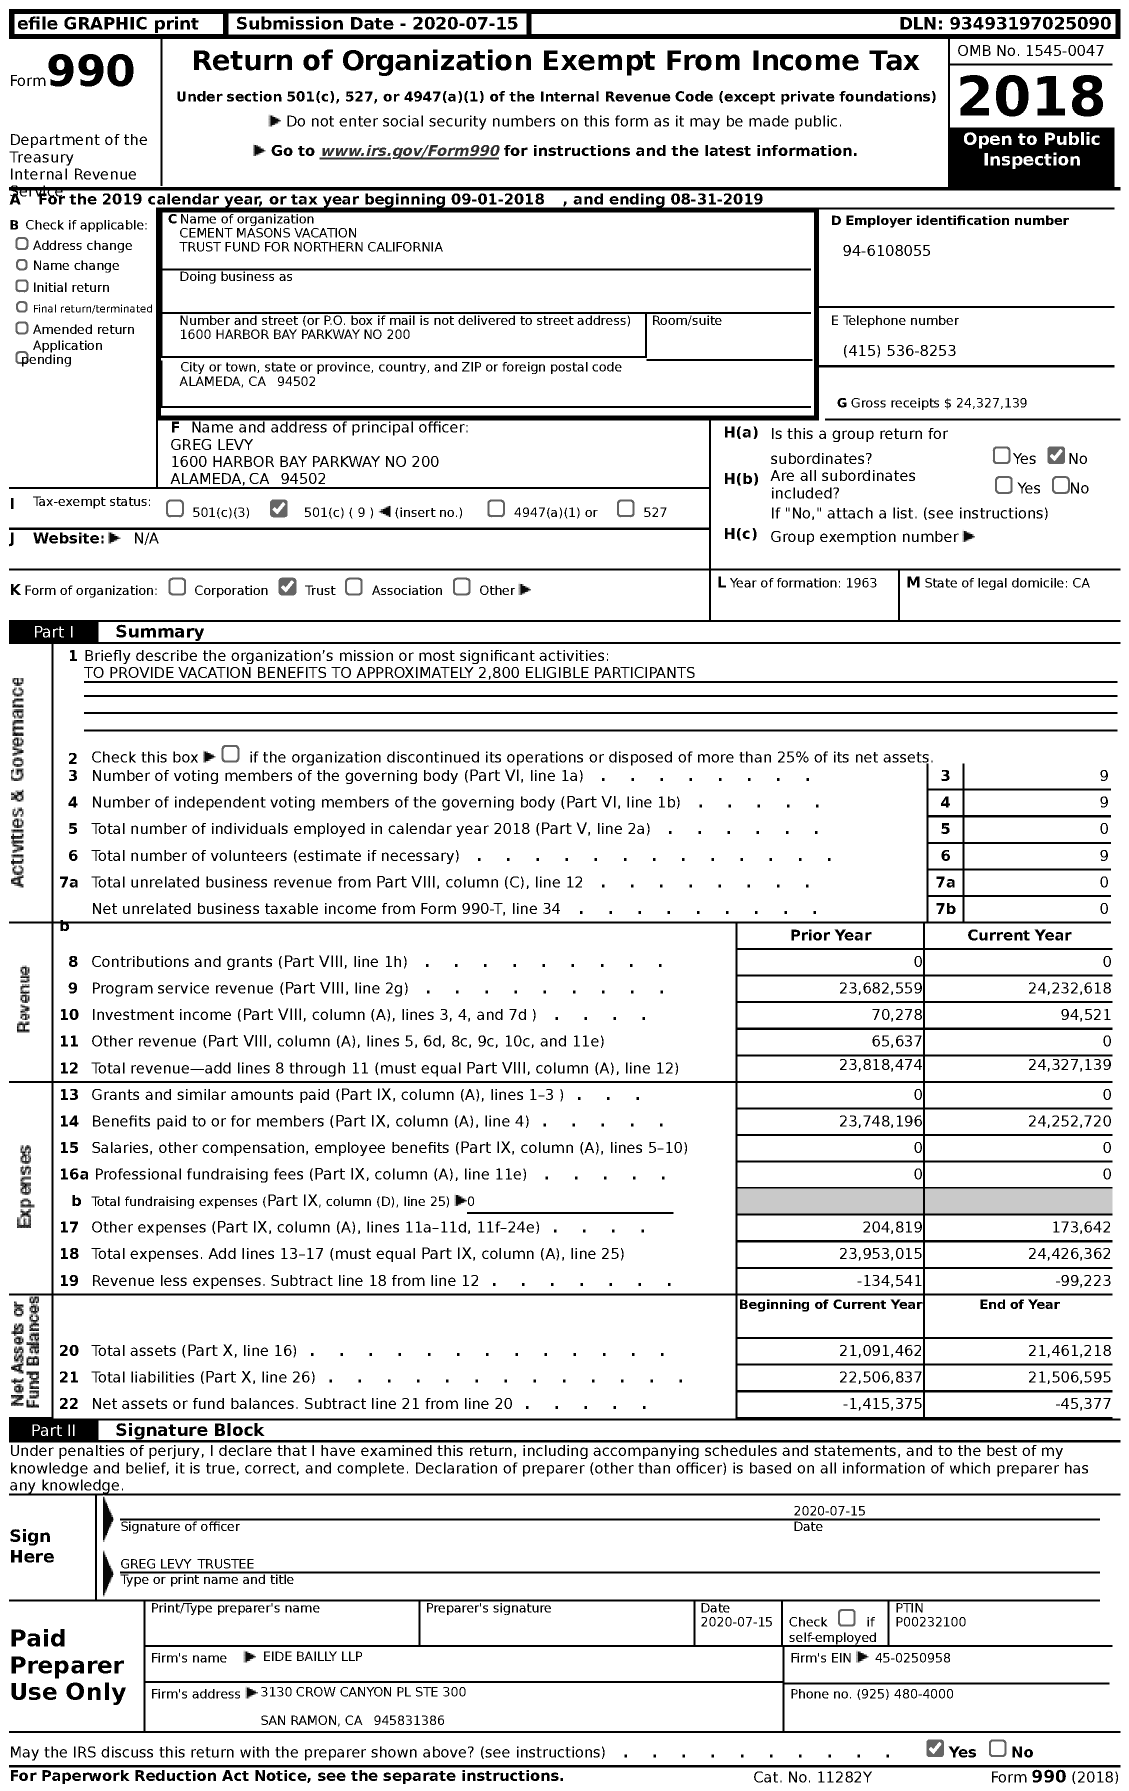 Image of first page of 2018 Form 990 for Cement Masons Vacation Trust Fund for Northern California